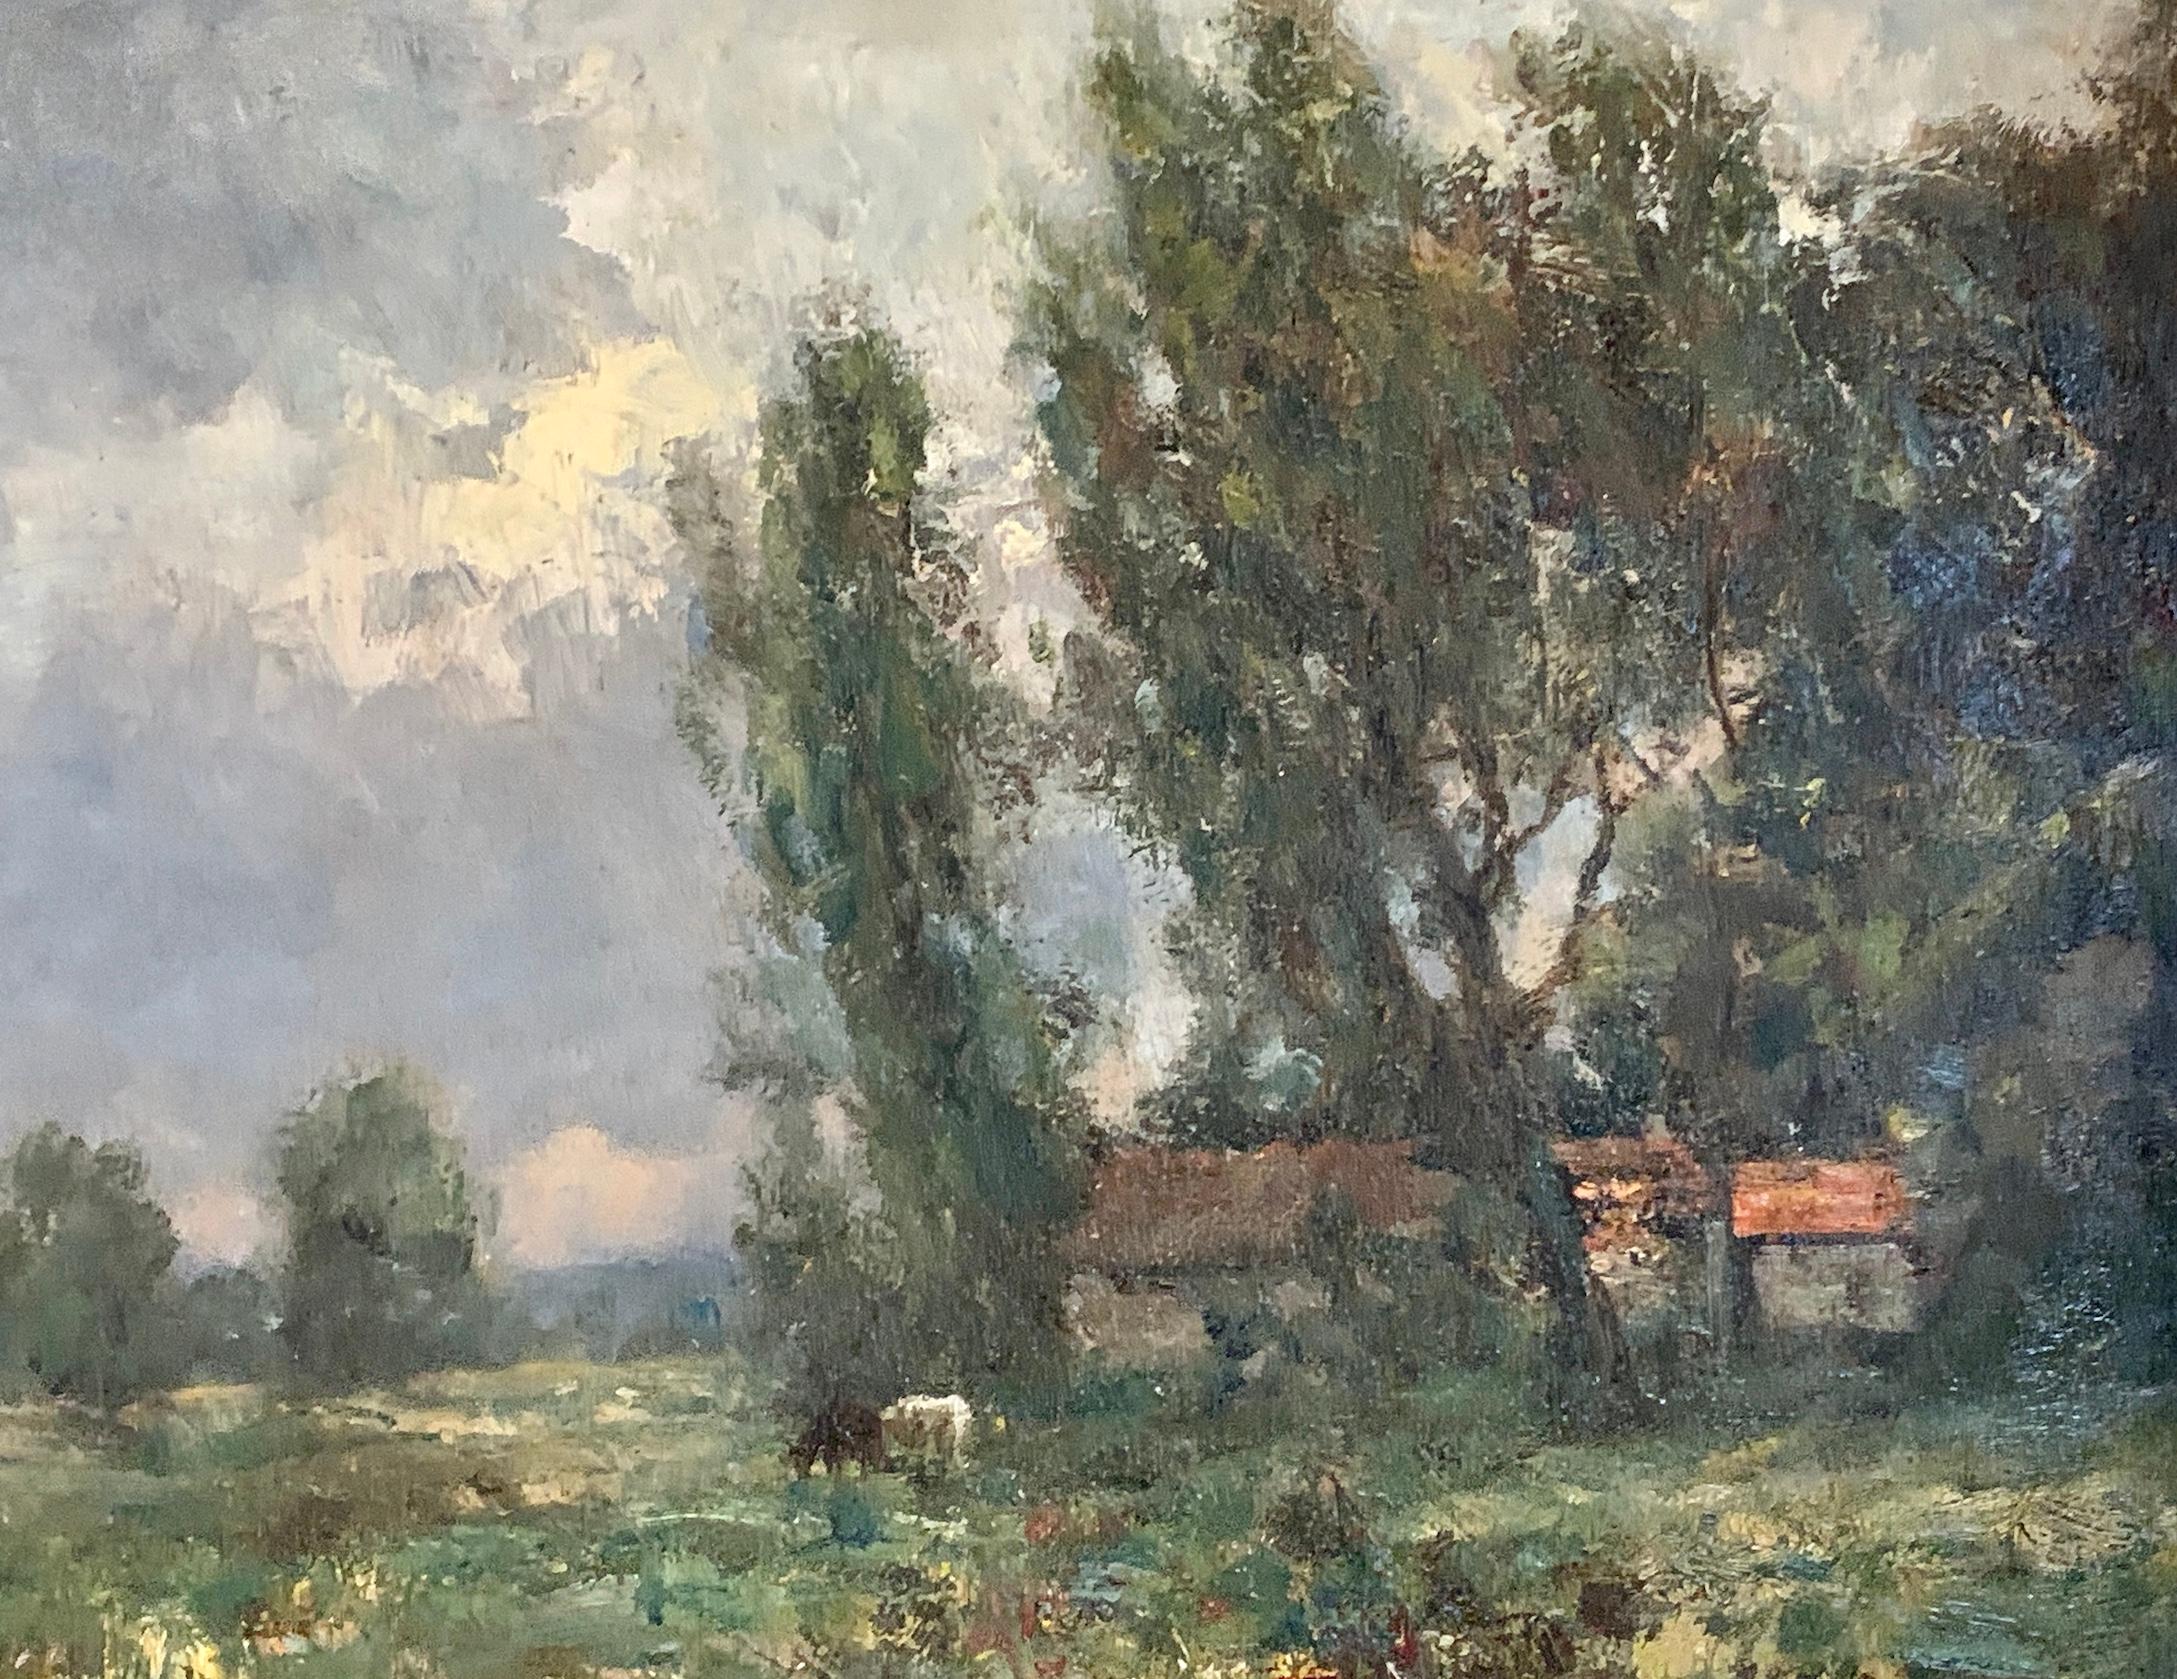 French impressionist landscape, Barbizon forest, with river and cows at Sunset - Painting by George Boyle